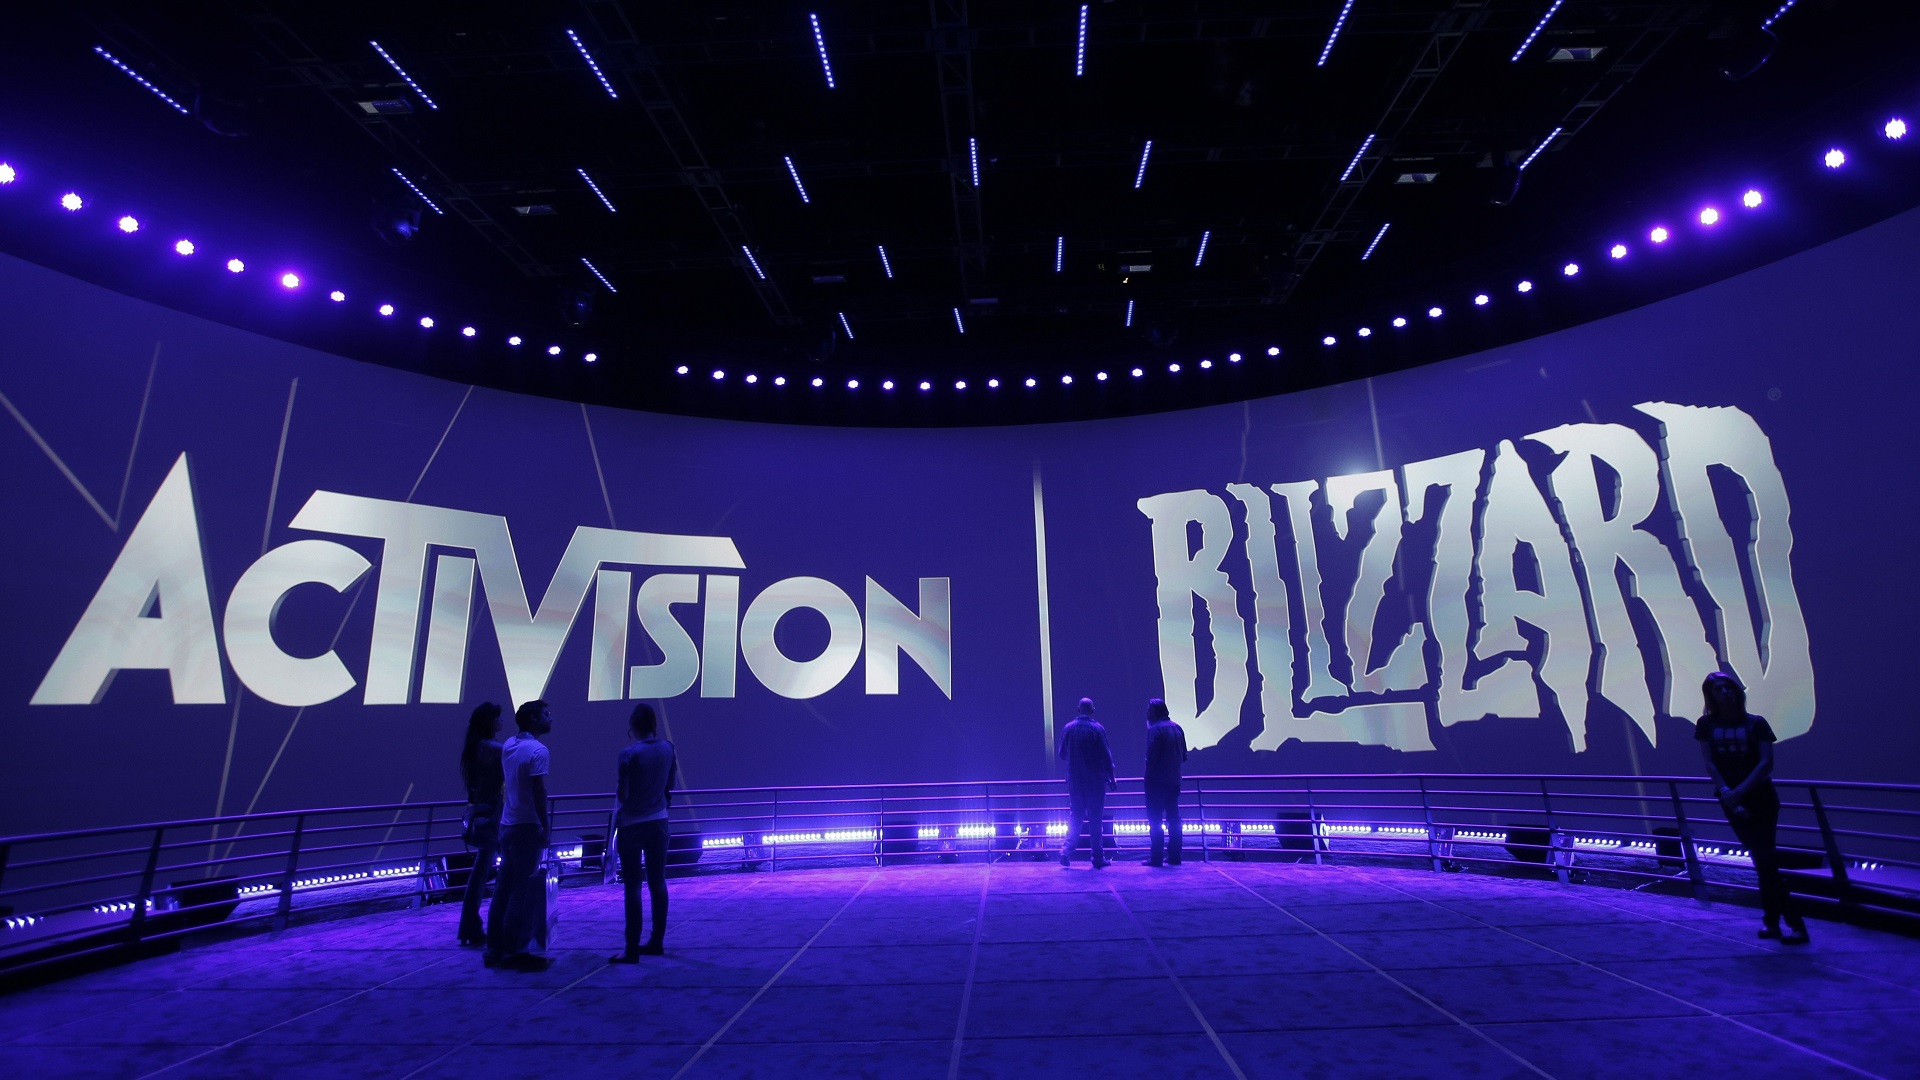 CEO of Activison Blizzard Sets Workplace Harassment Goals Tied to His Compensation